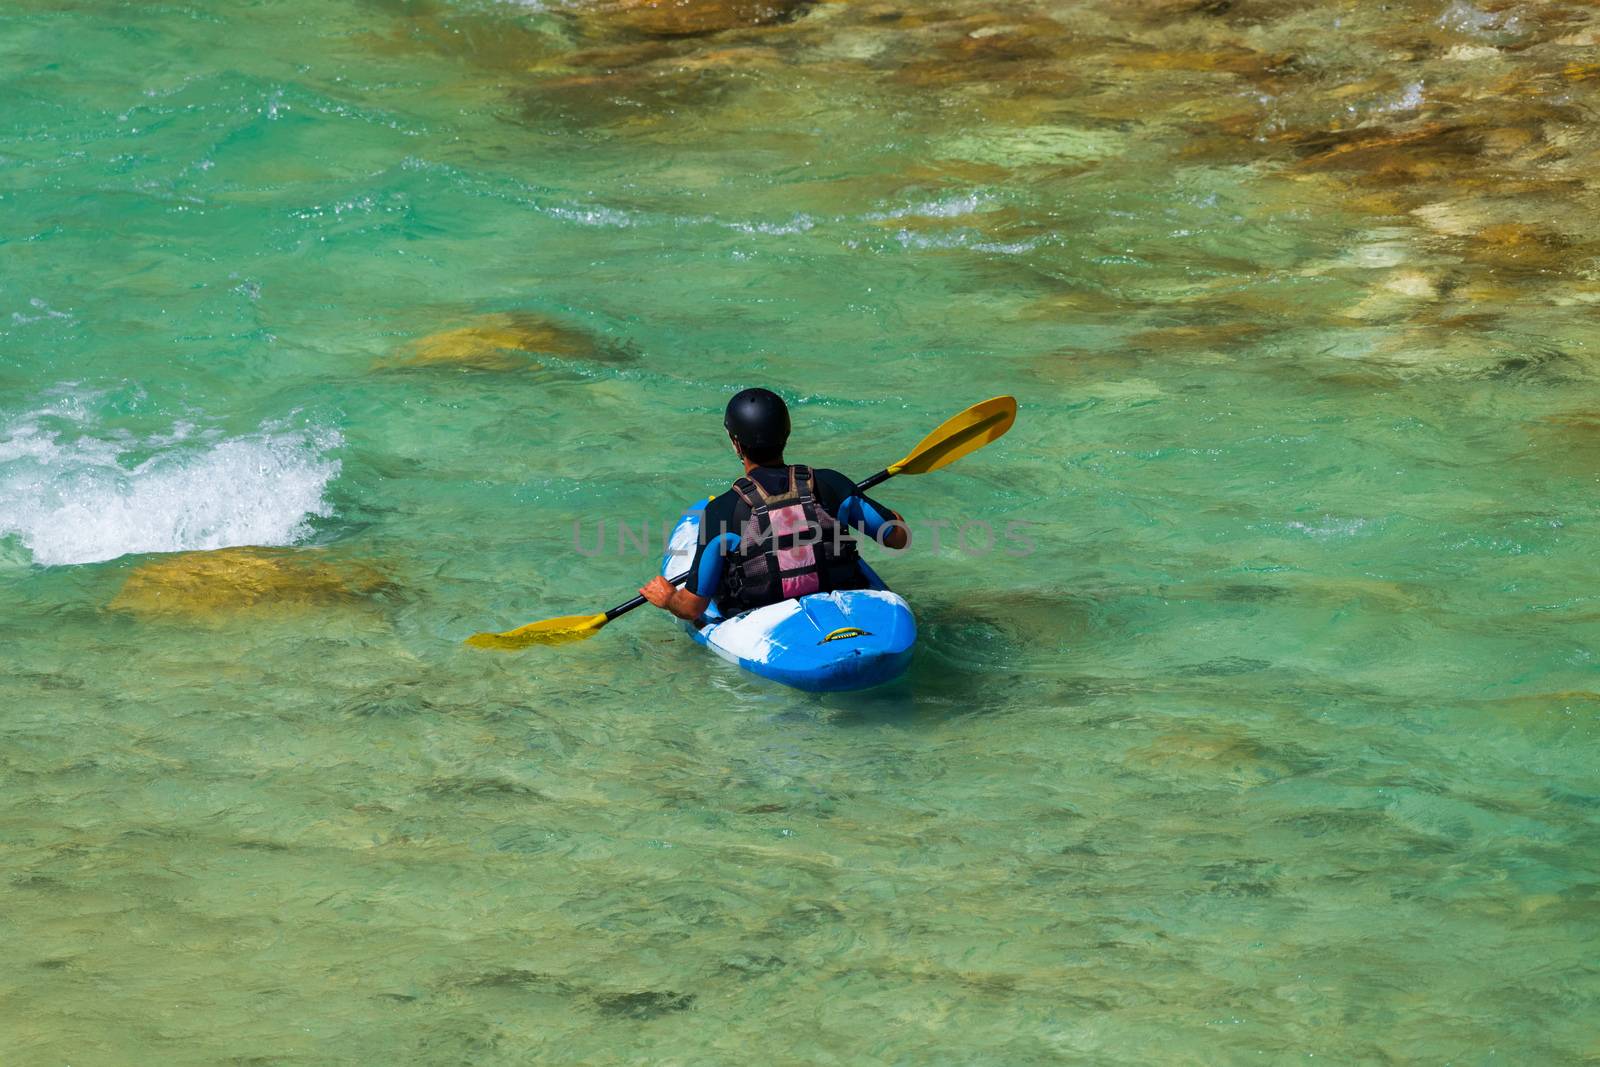 A man kayaking in emerald, turquoise mountain river, wearing wetsuits and avoiding roks and boulders in the streaming water, facing away, blue kayak